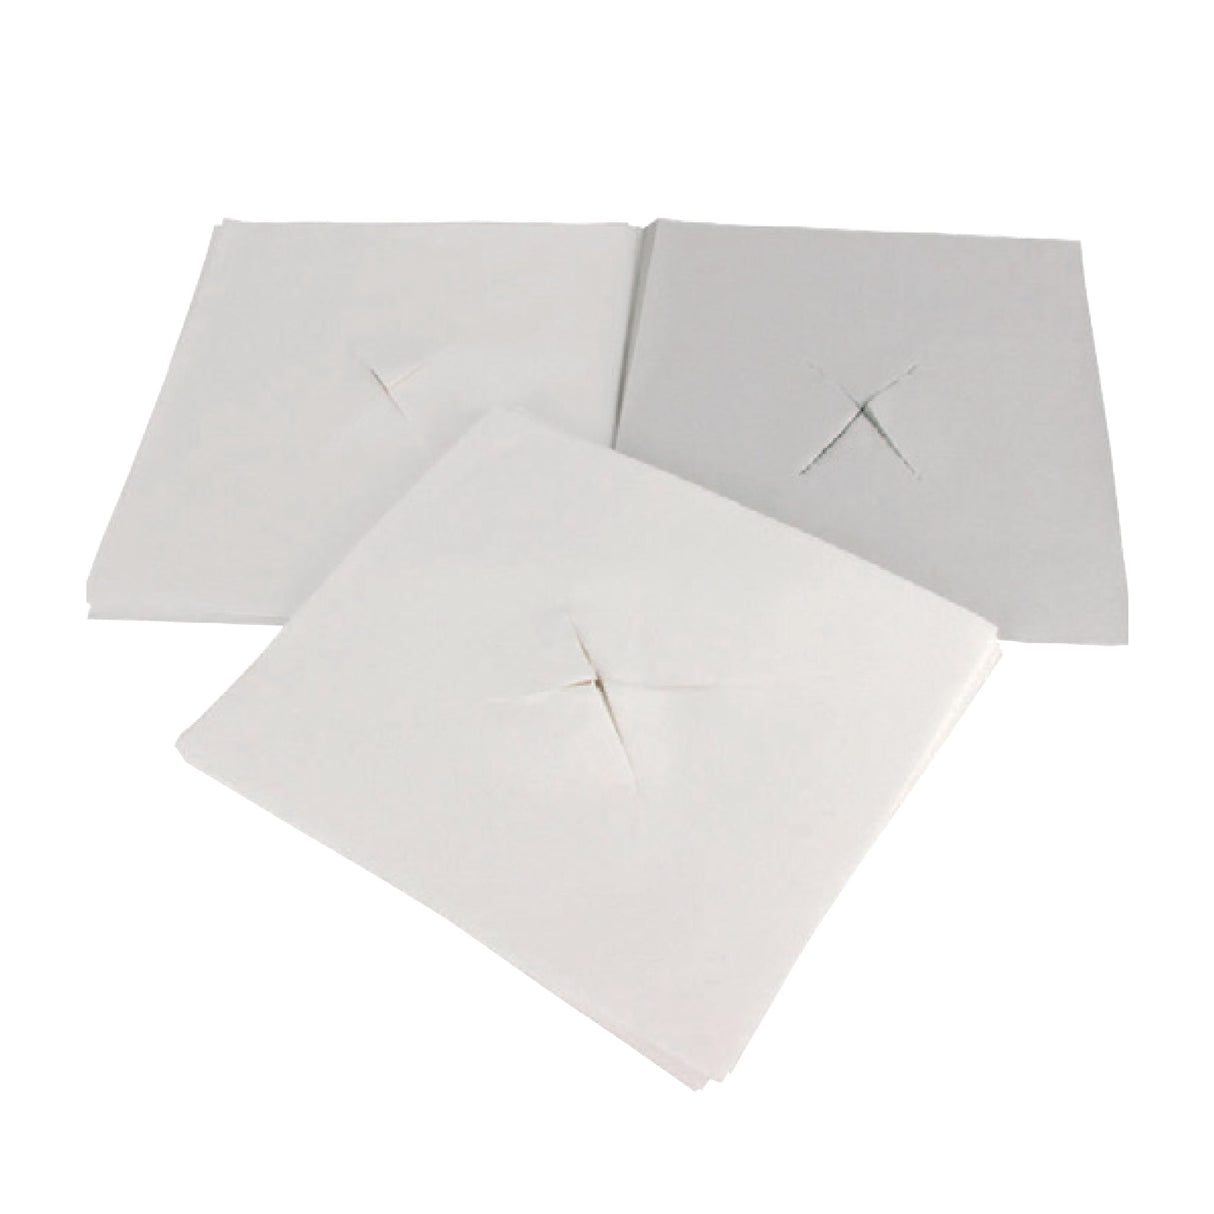 Sheets of protective paper for the face | 500 pcs. (various sizes)